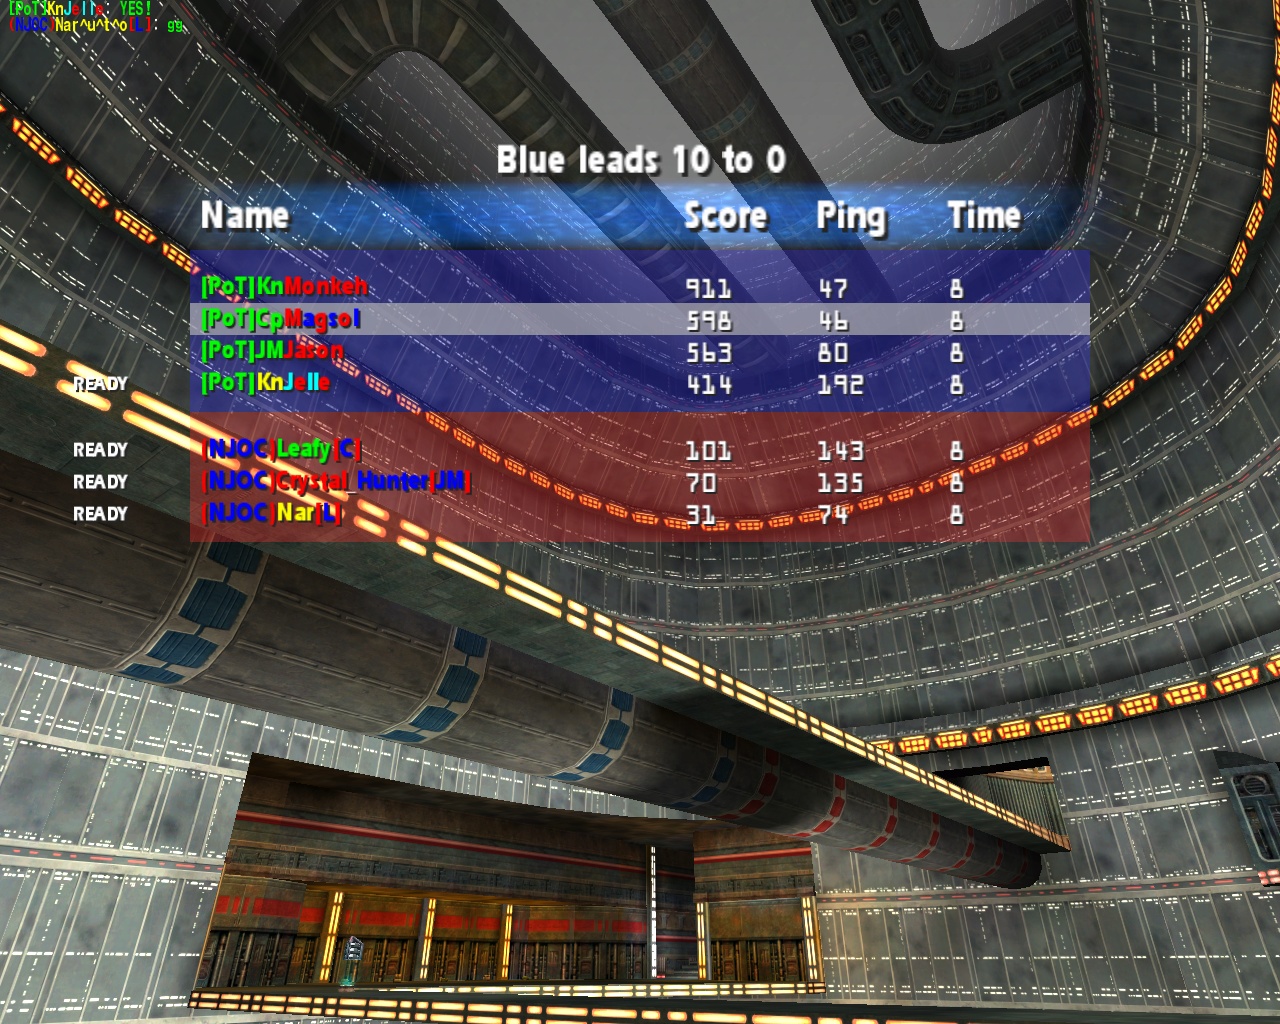 Screenshot of in-game scoreboard during the match against NJOC, showing PoT with a slim edge.